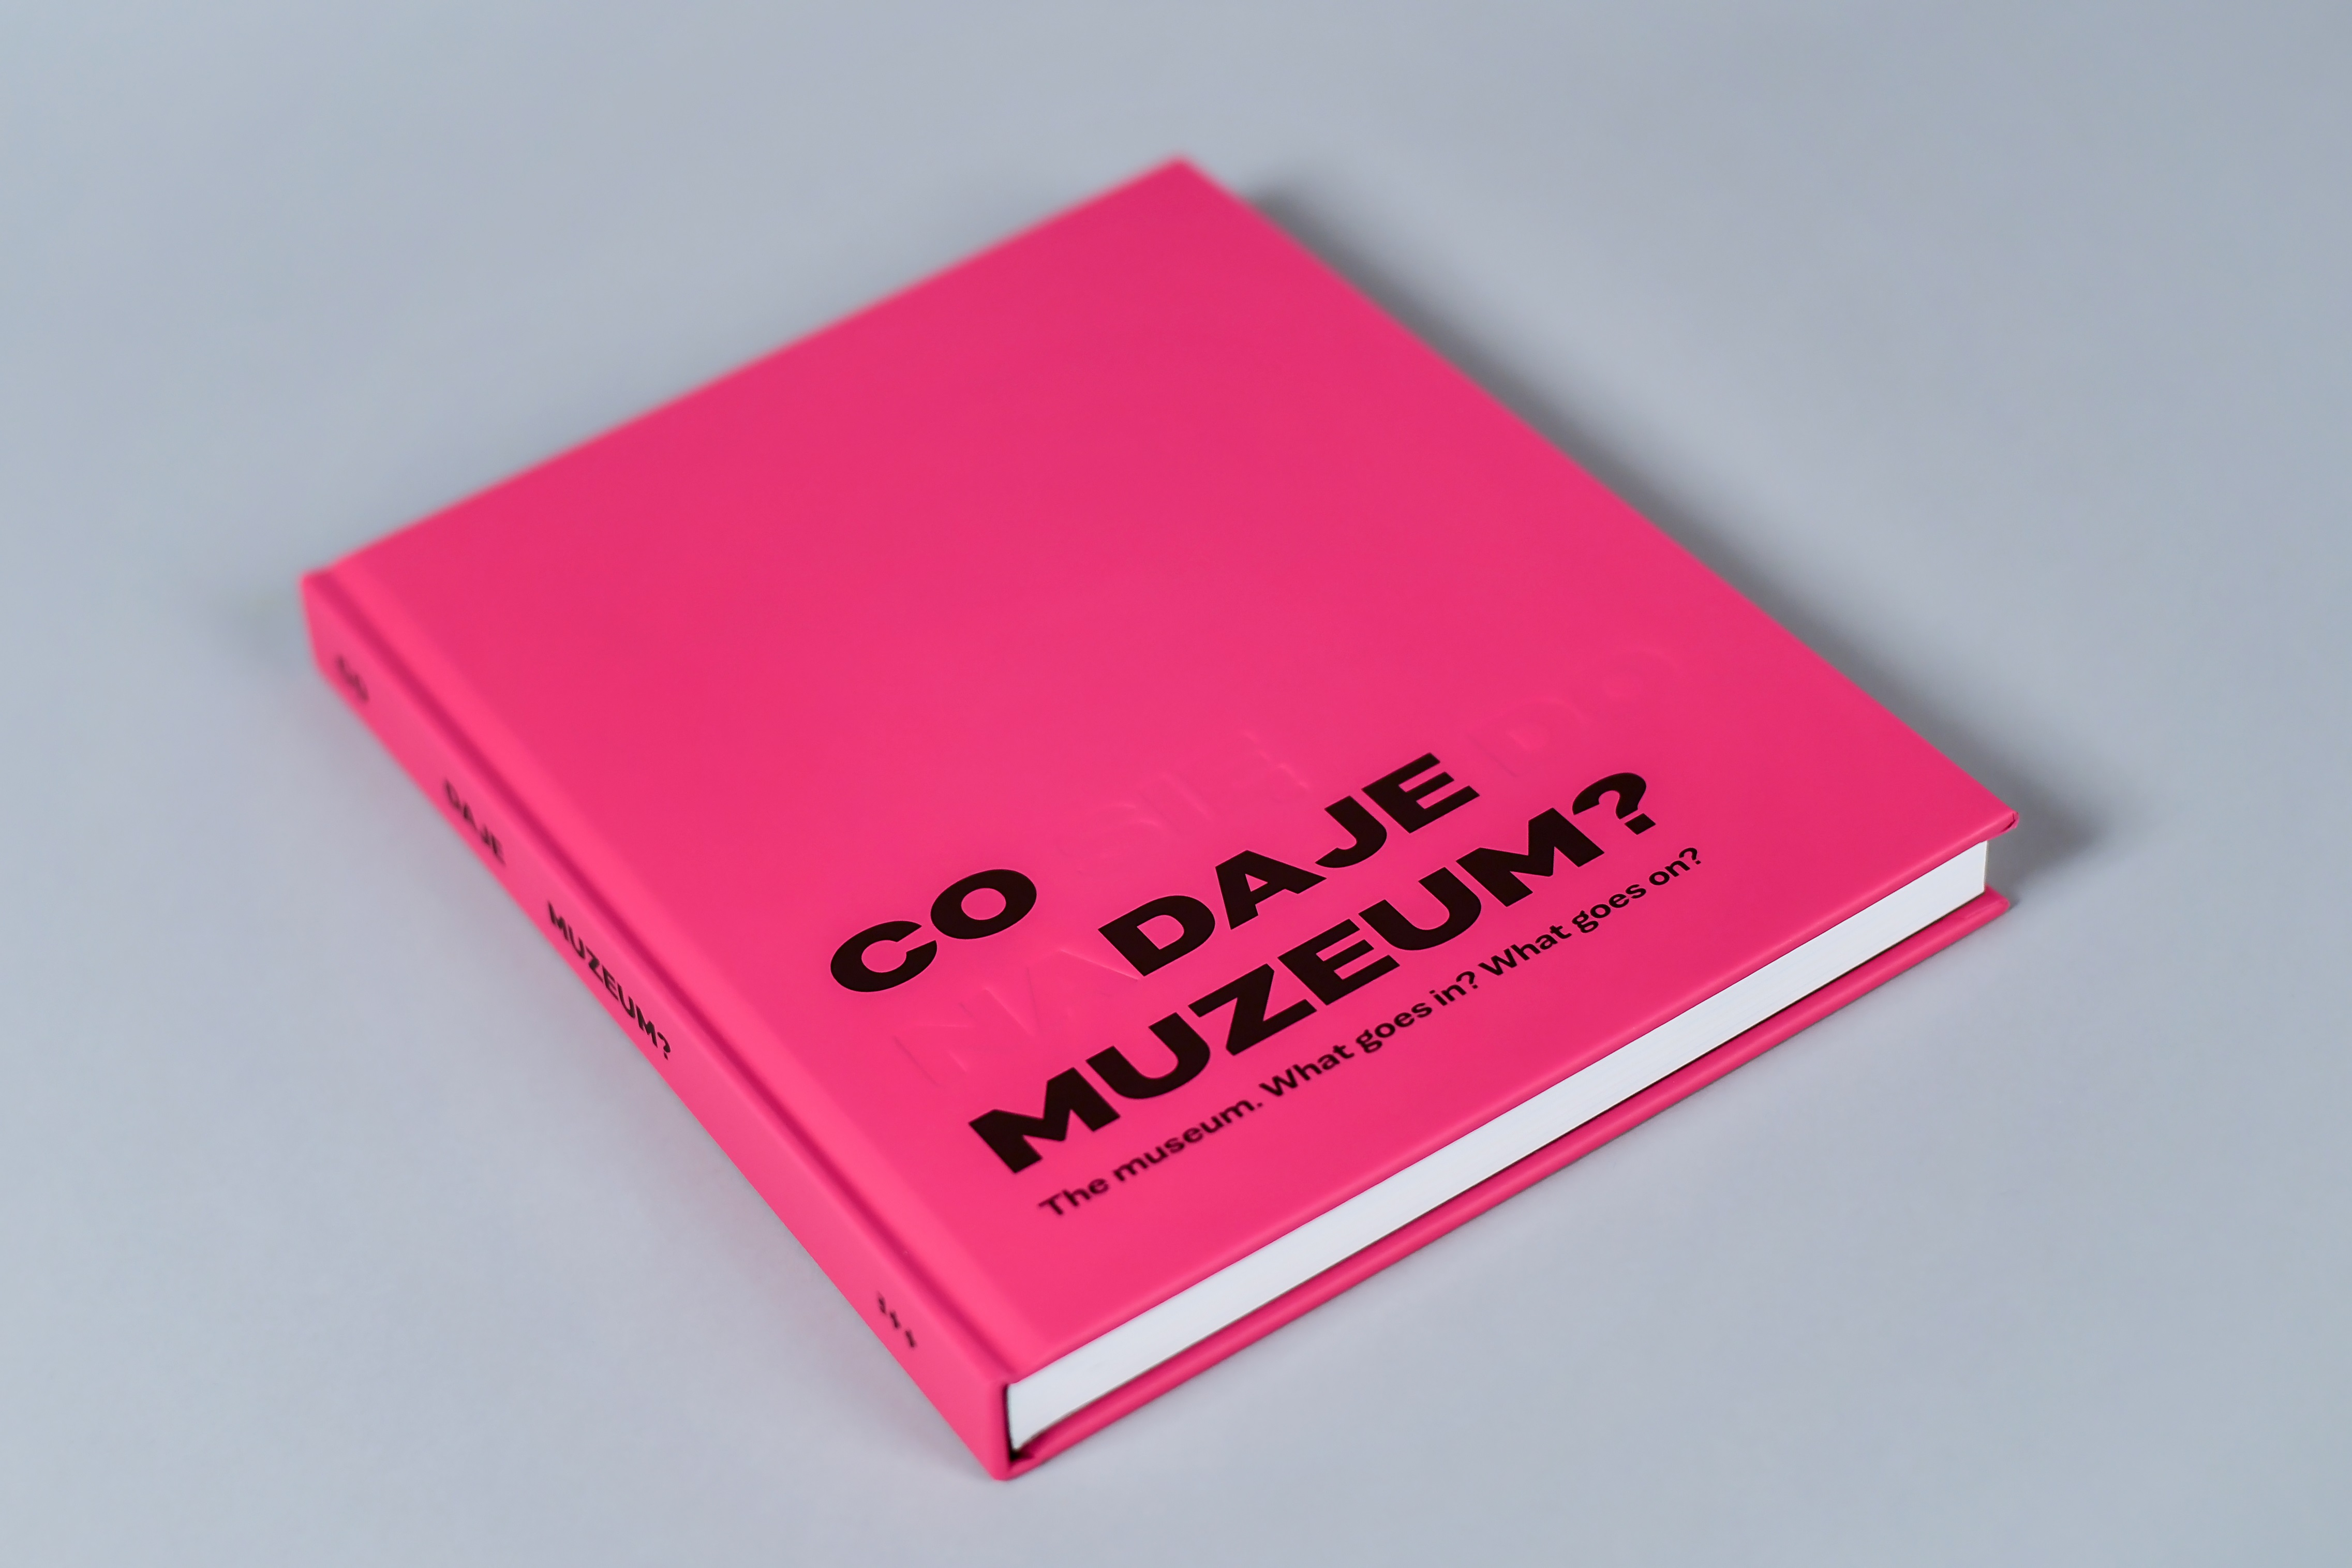 Image. Catalogue of the temporary exhibition "The Museum. What goes in. What goes out?"